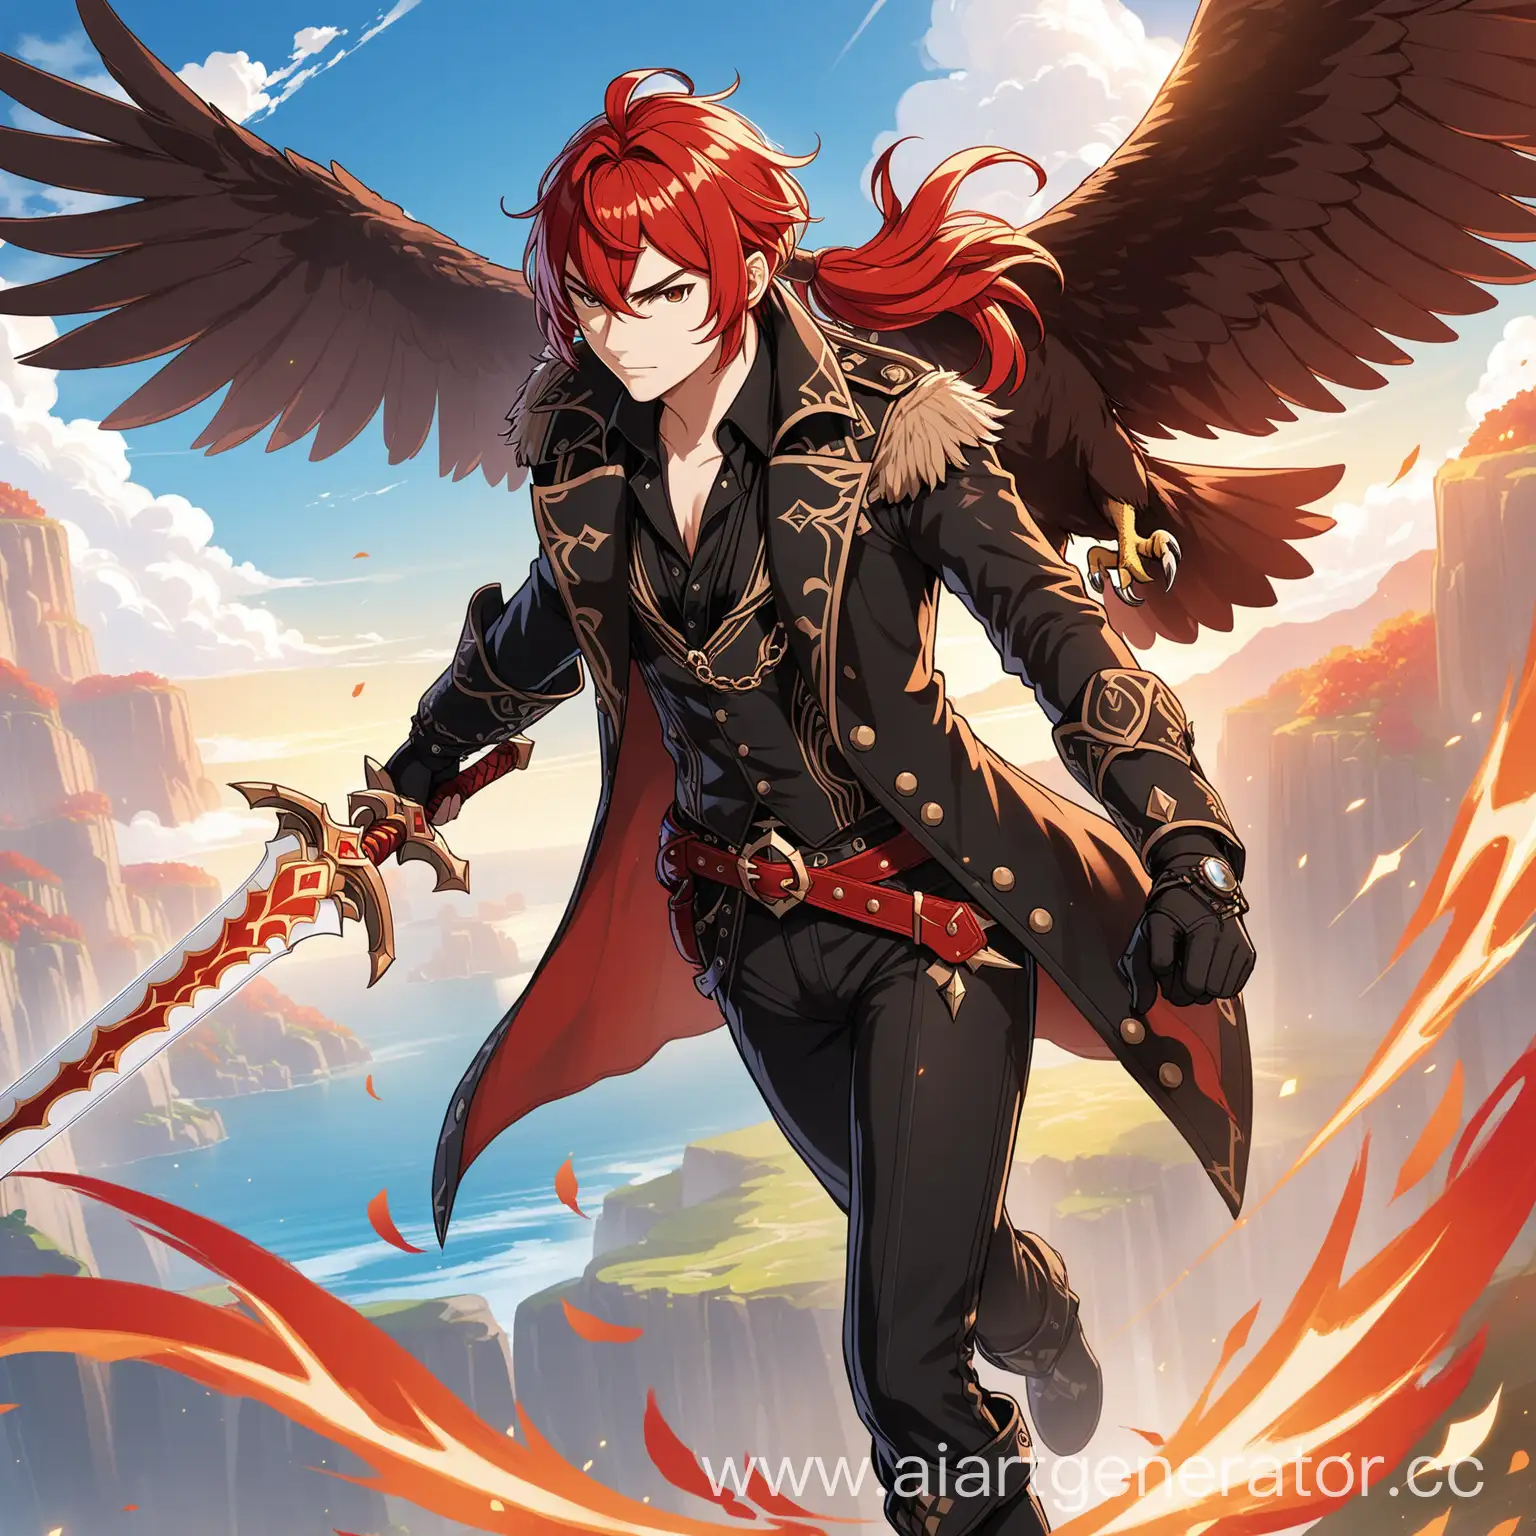 Diluc-Genshin-Impact-Fan-Art-CrimsonHaired-Warrior-with-TwoHanded-Sword-and-Eagle-Companion